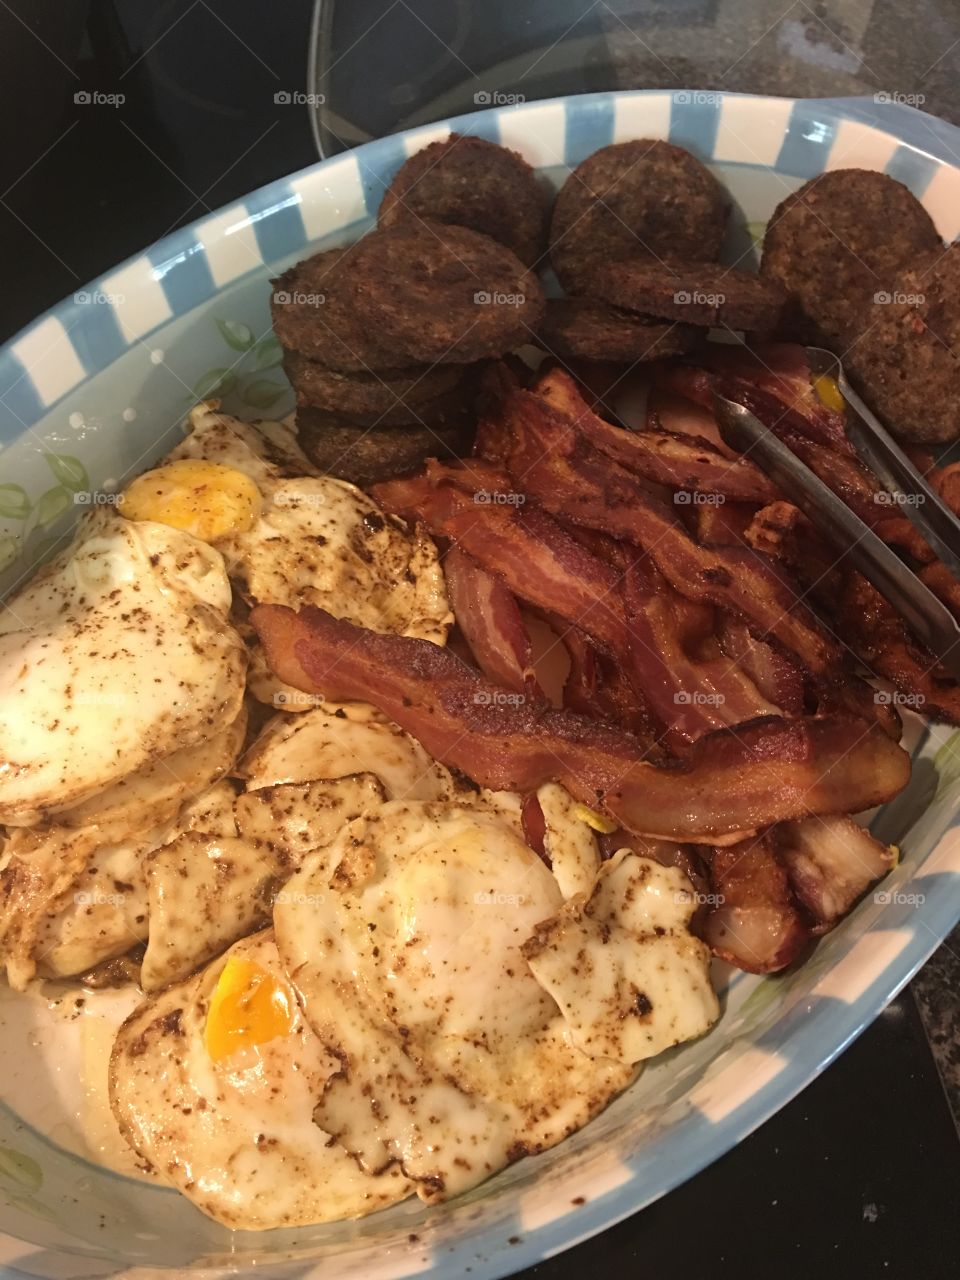 Eggs bacon and sausage 